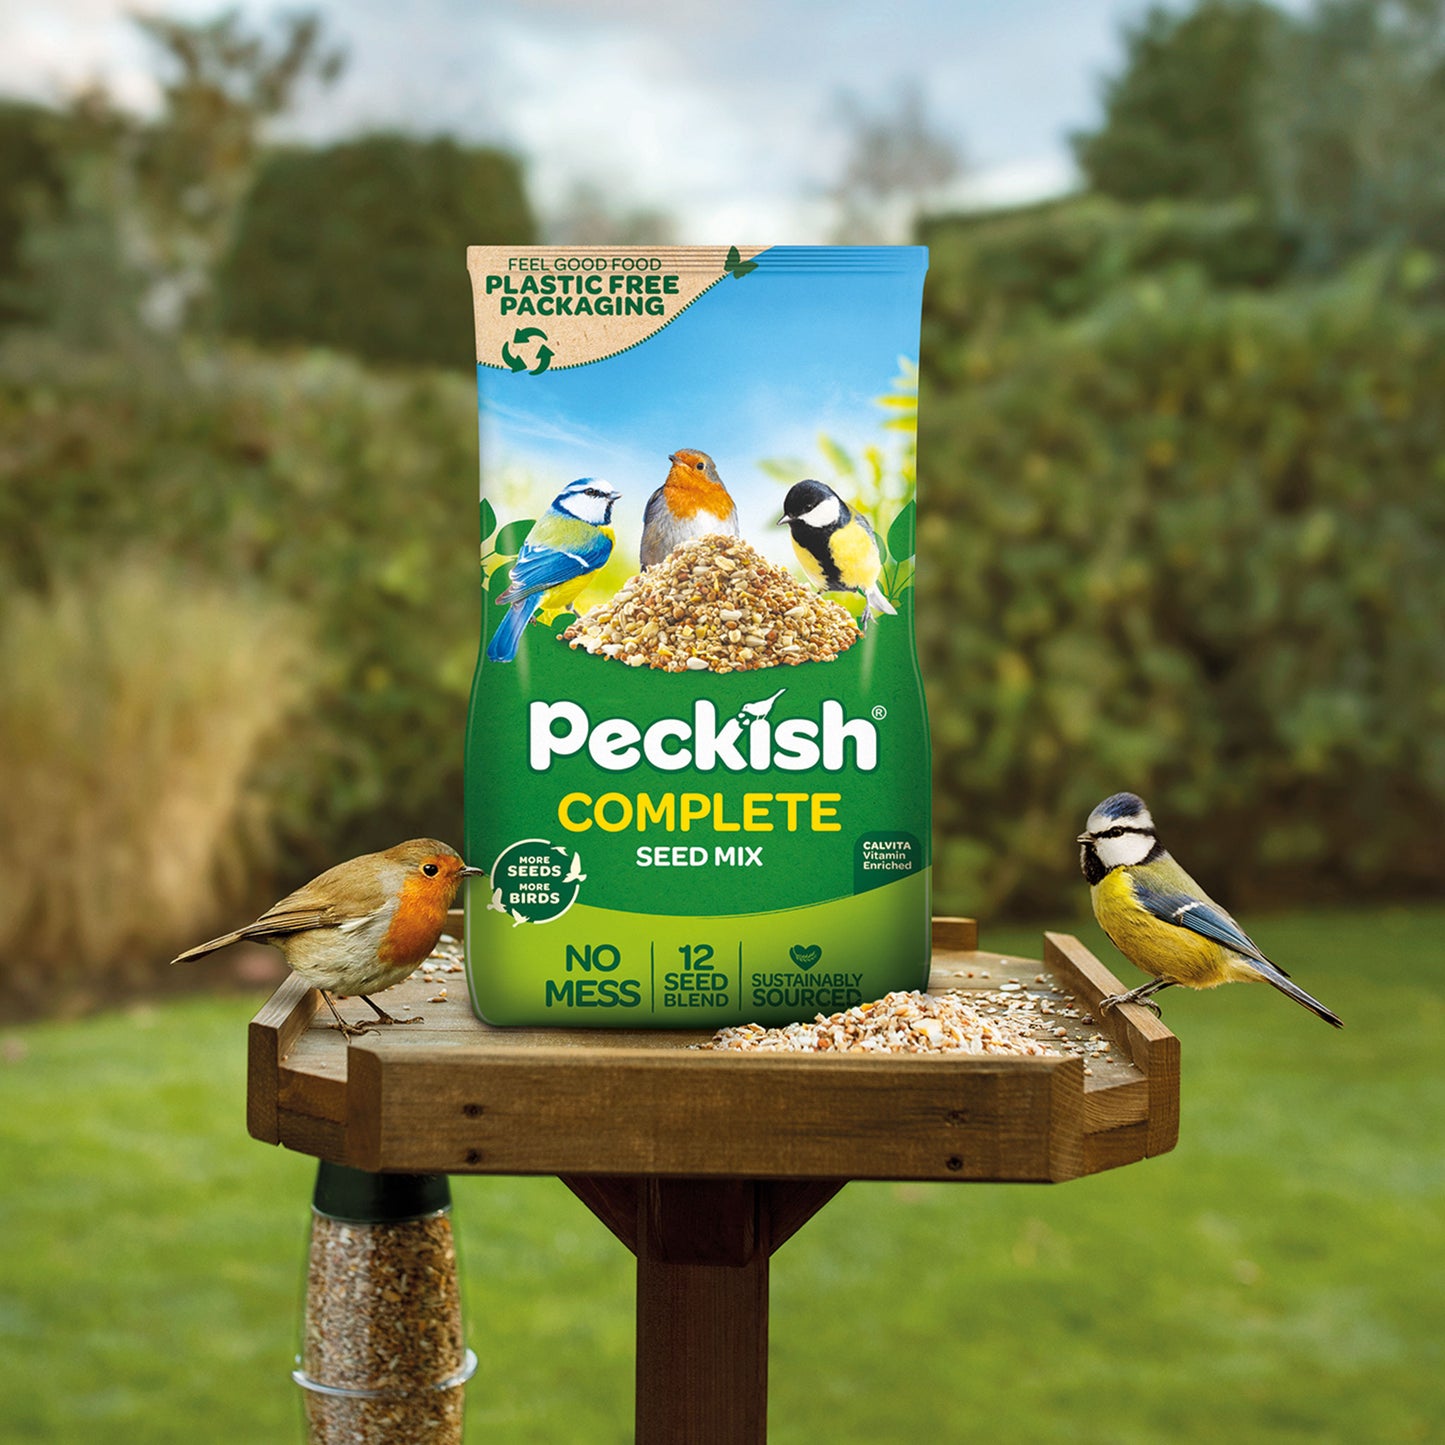 Peckish Complete packaging on bird table